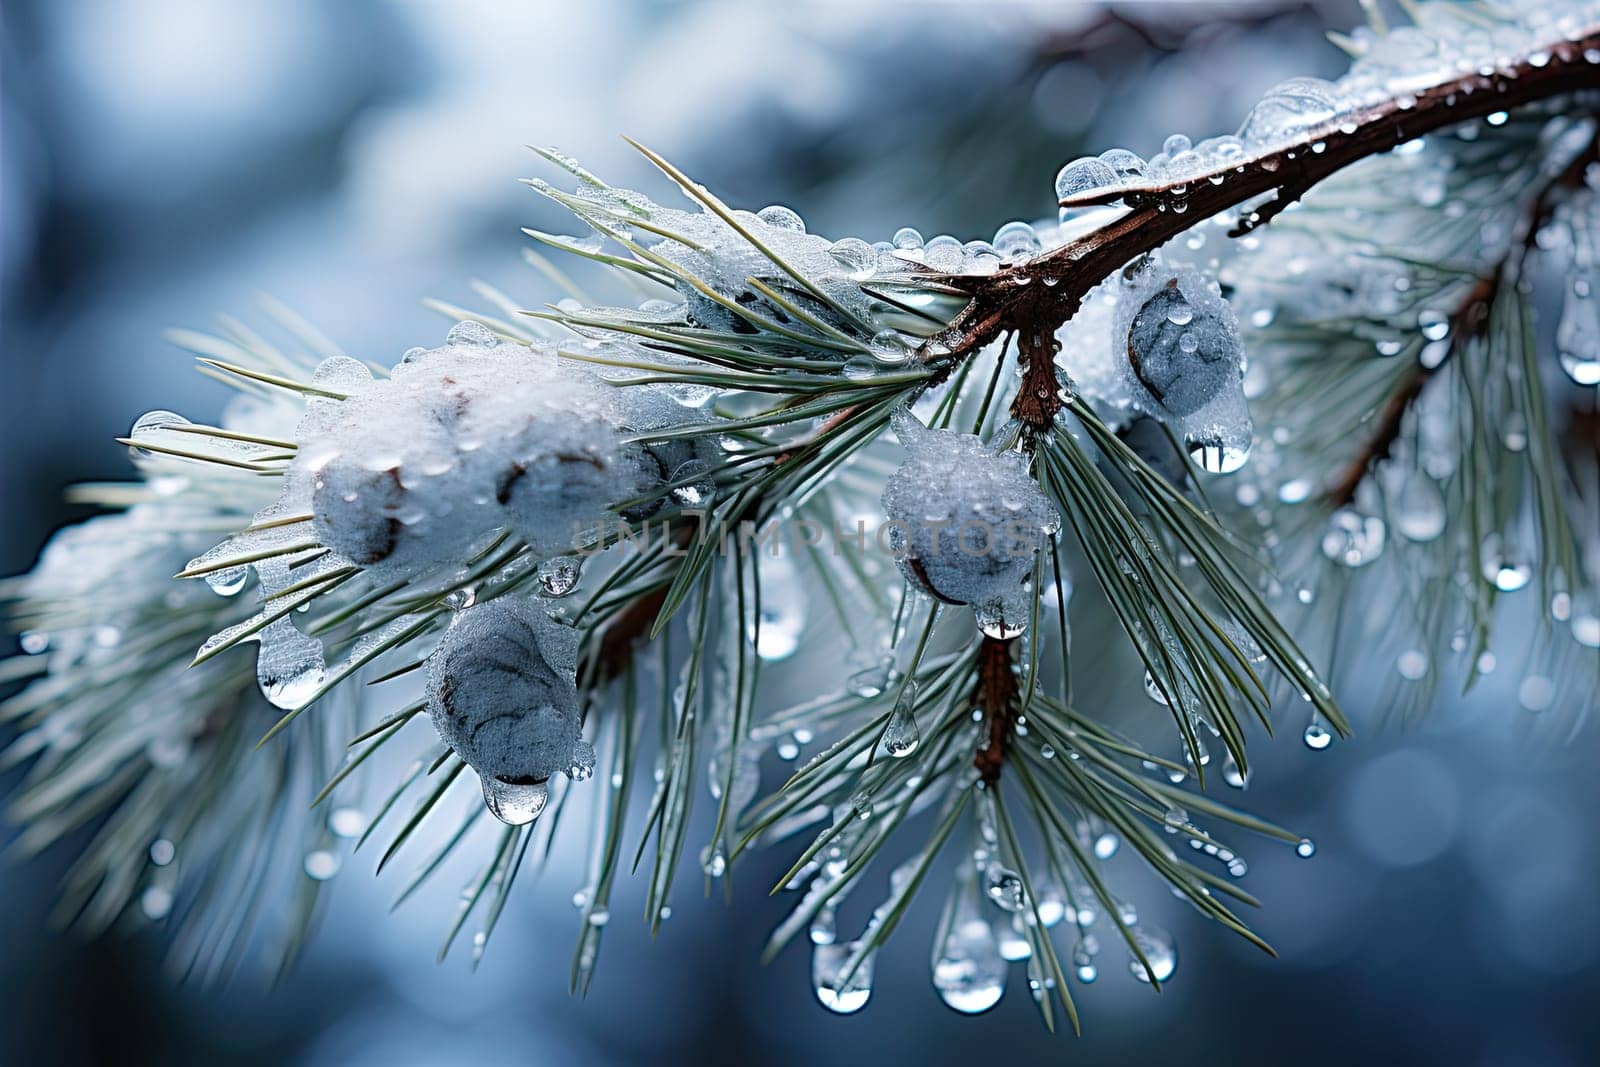 A Winter Wonderland: Close-Up of Snow-Covered Pine Tree with Glistening Needles and Frosty Branches